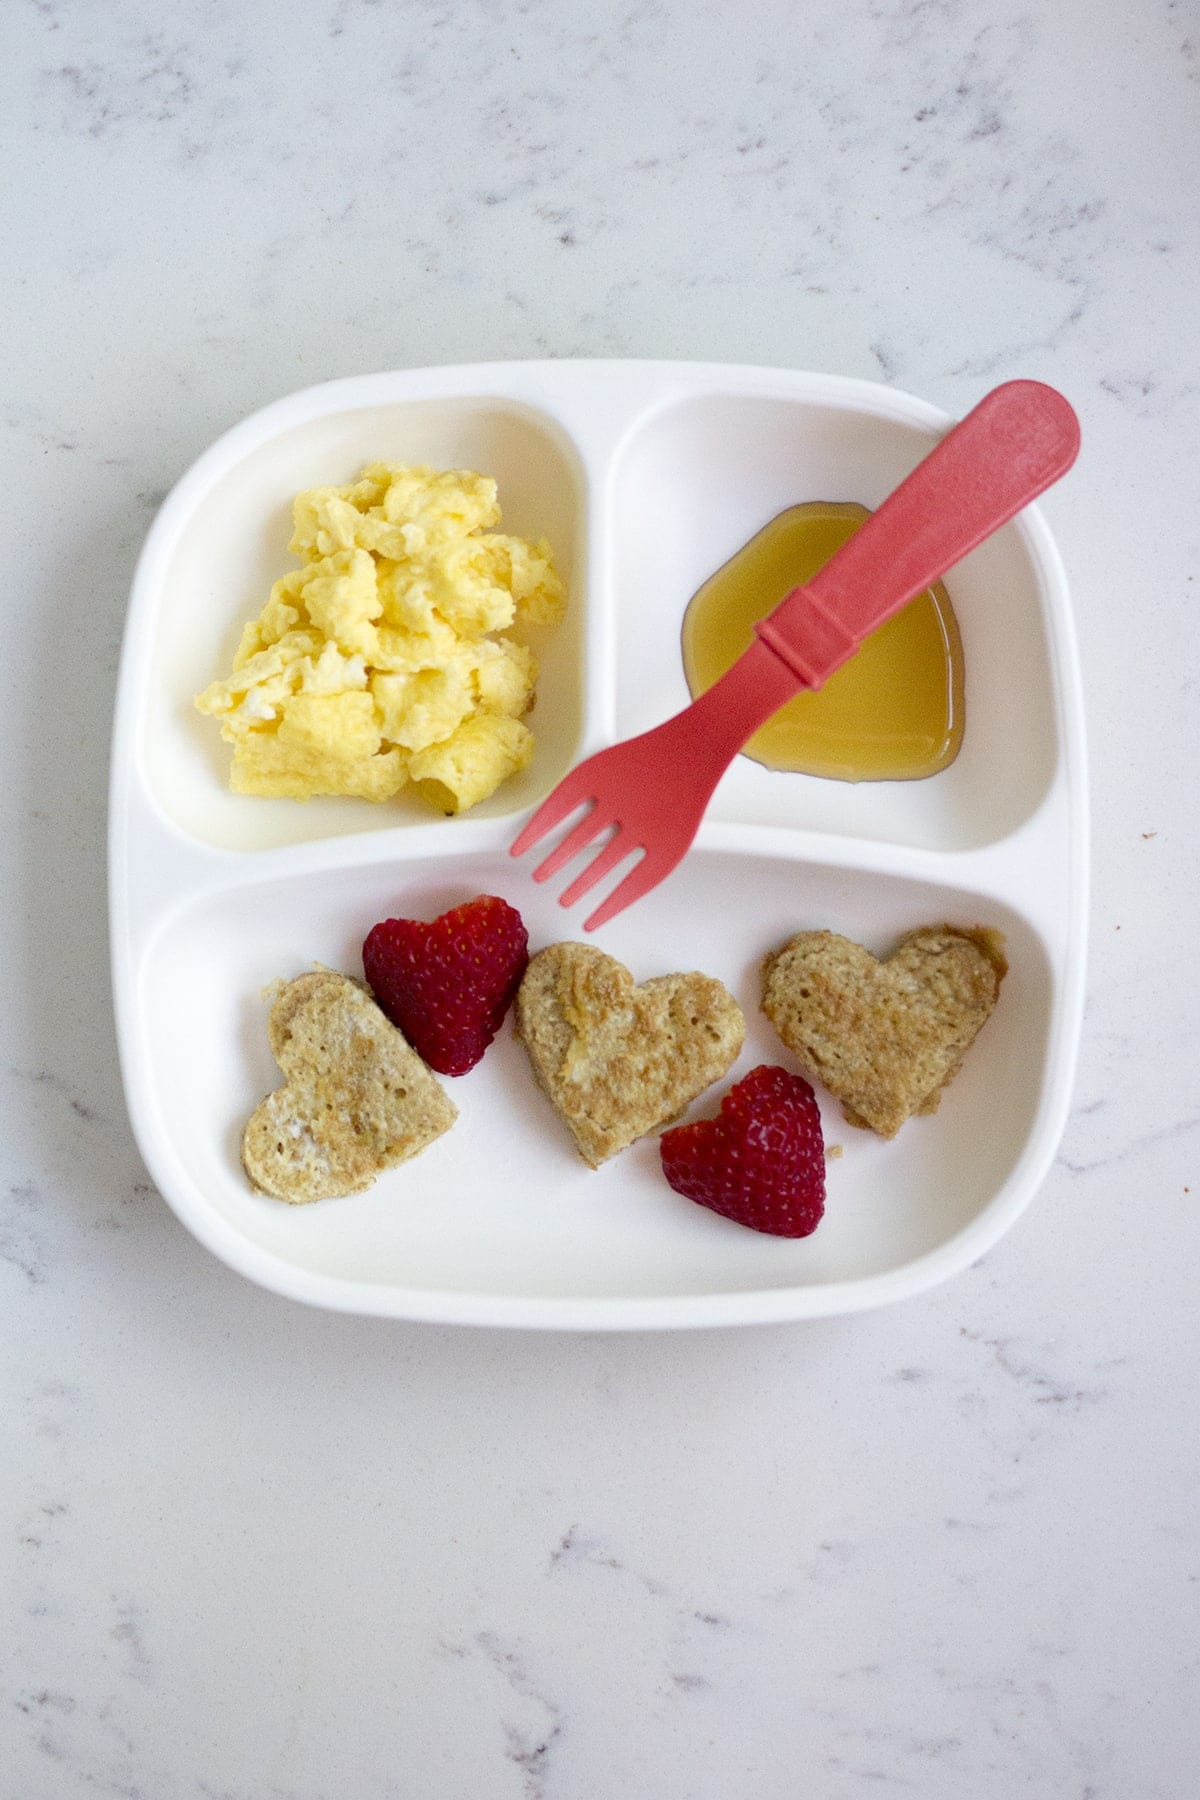 Toddler Meals What I fed the twins